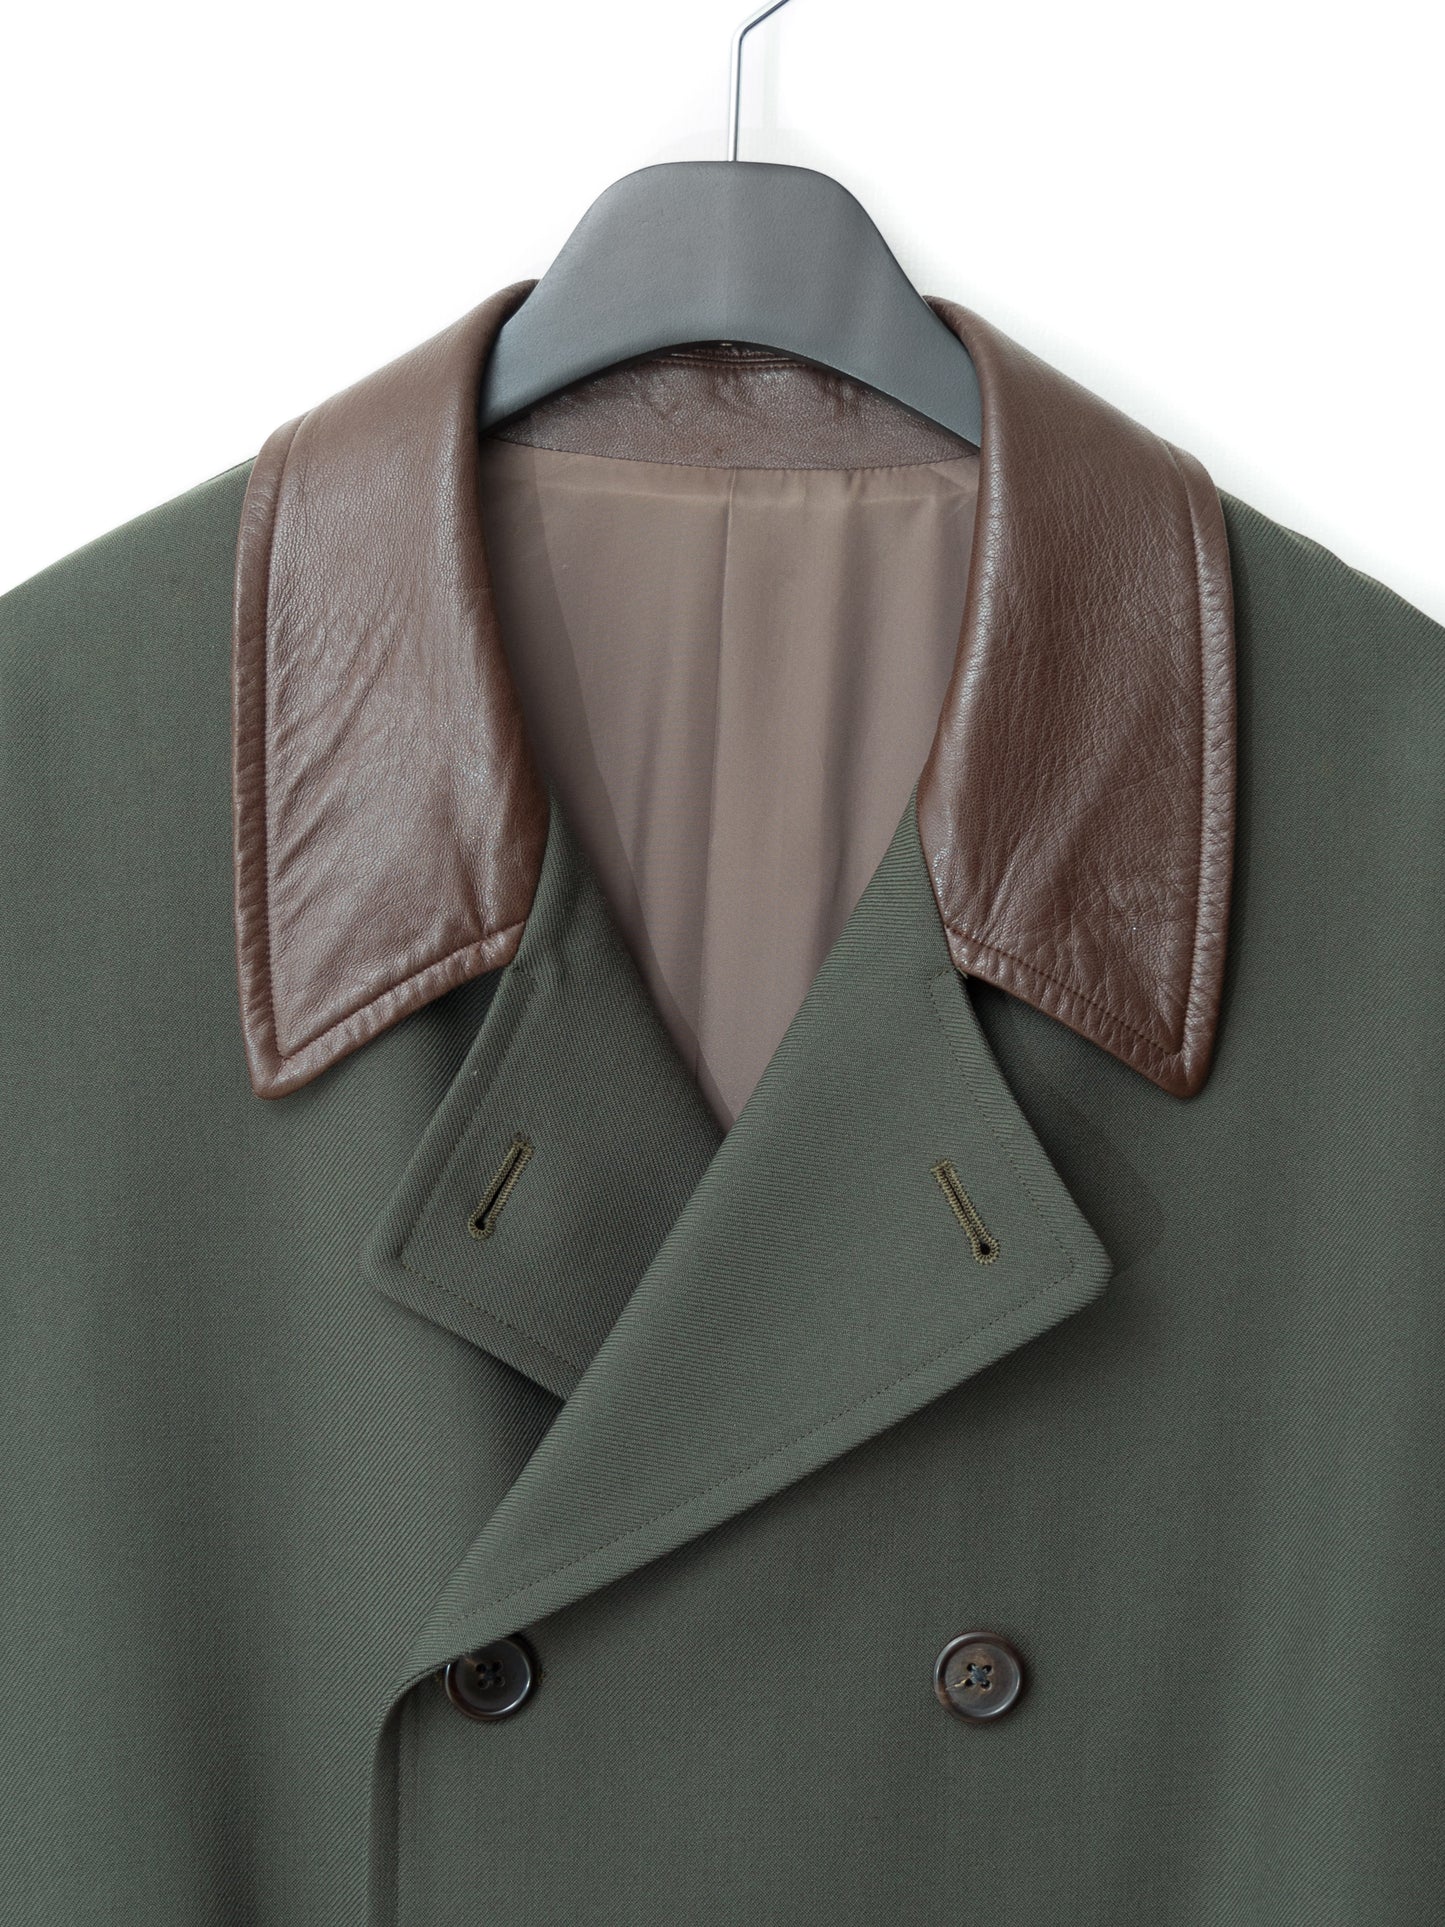 double breasted coat loden ∙ wool ∙ medium